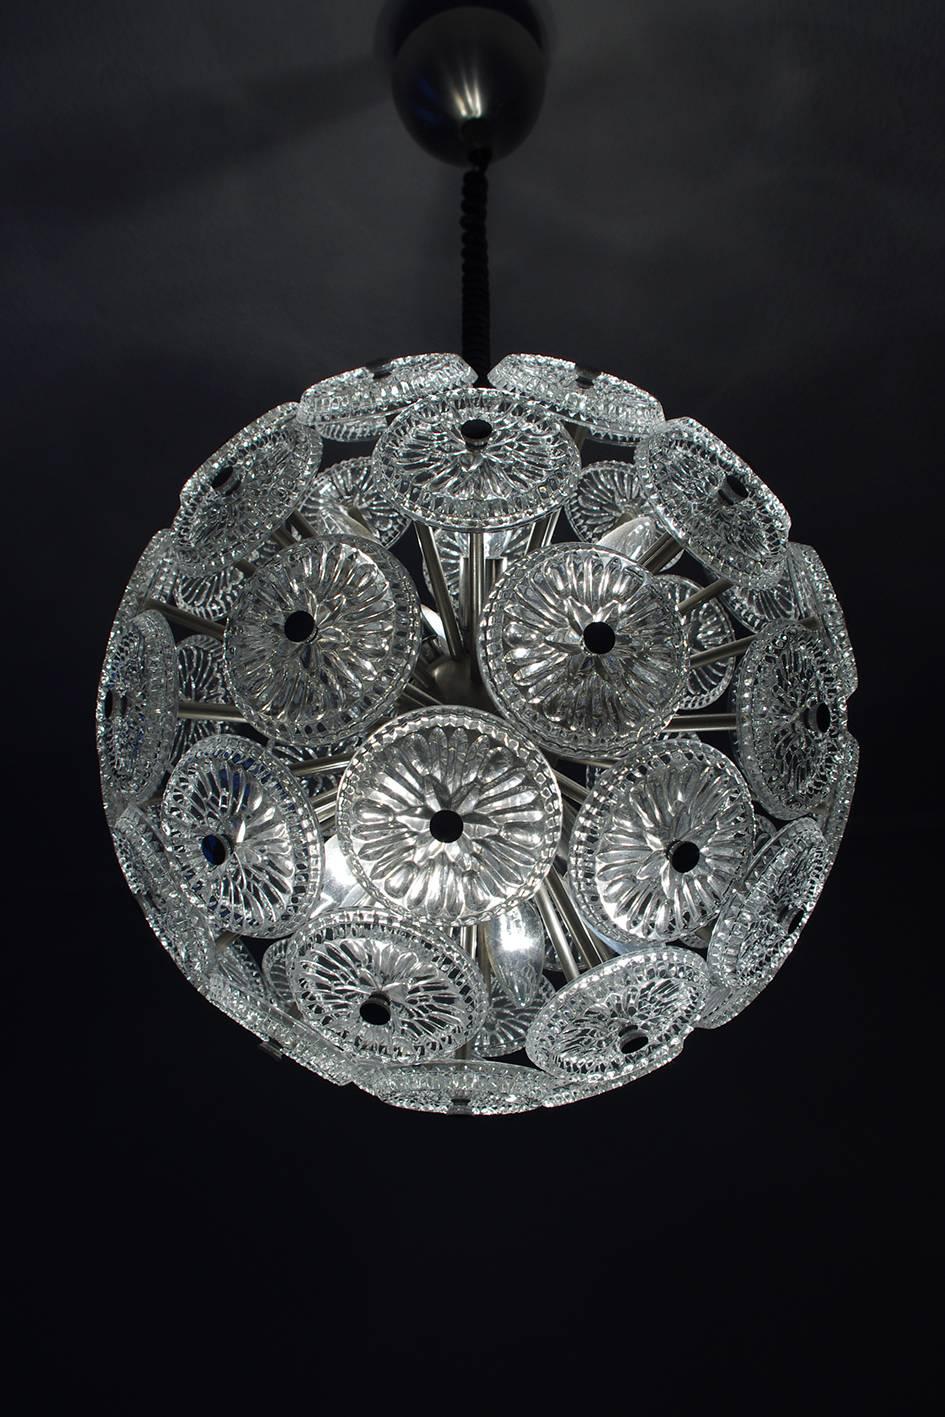 Beautiful glass and nickel Snowball chandelier.
Italy, 1960s
Lamp sockets: 10